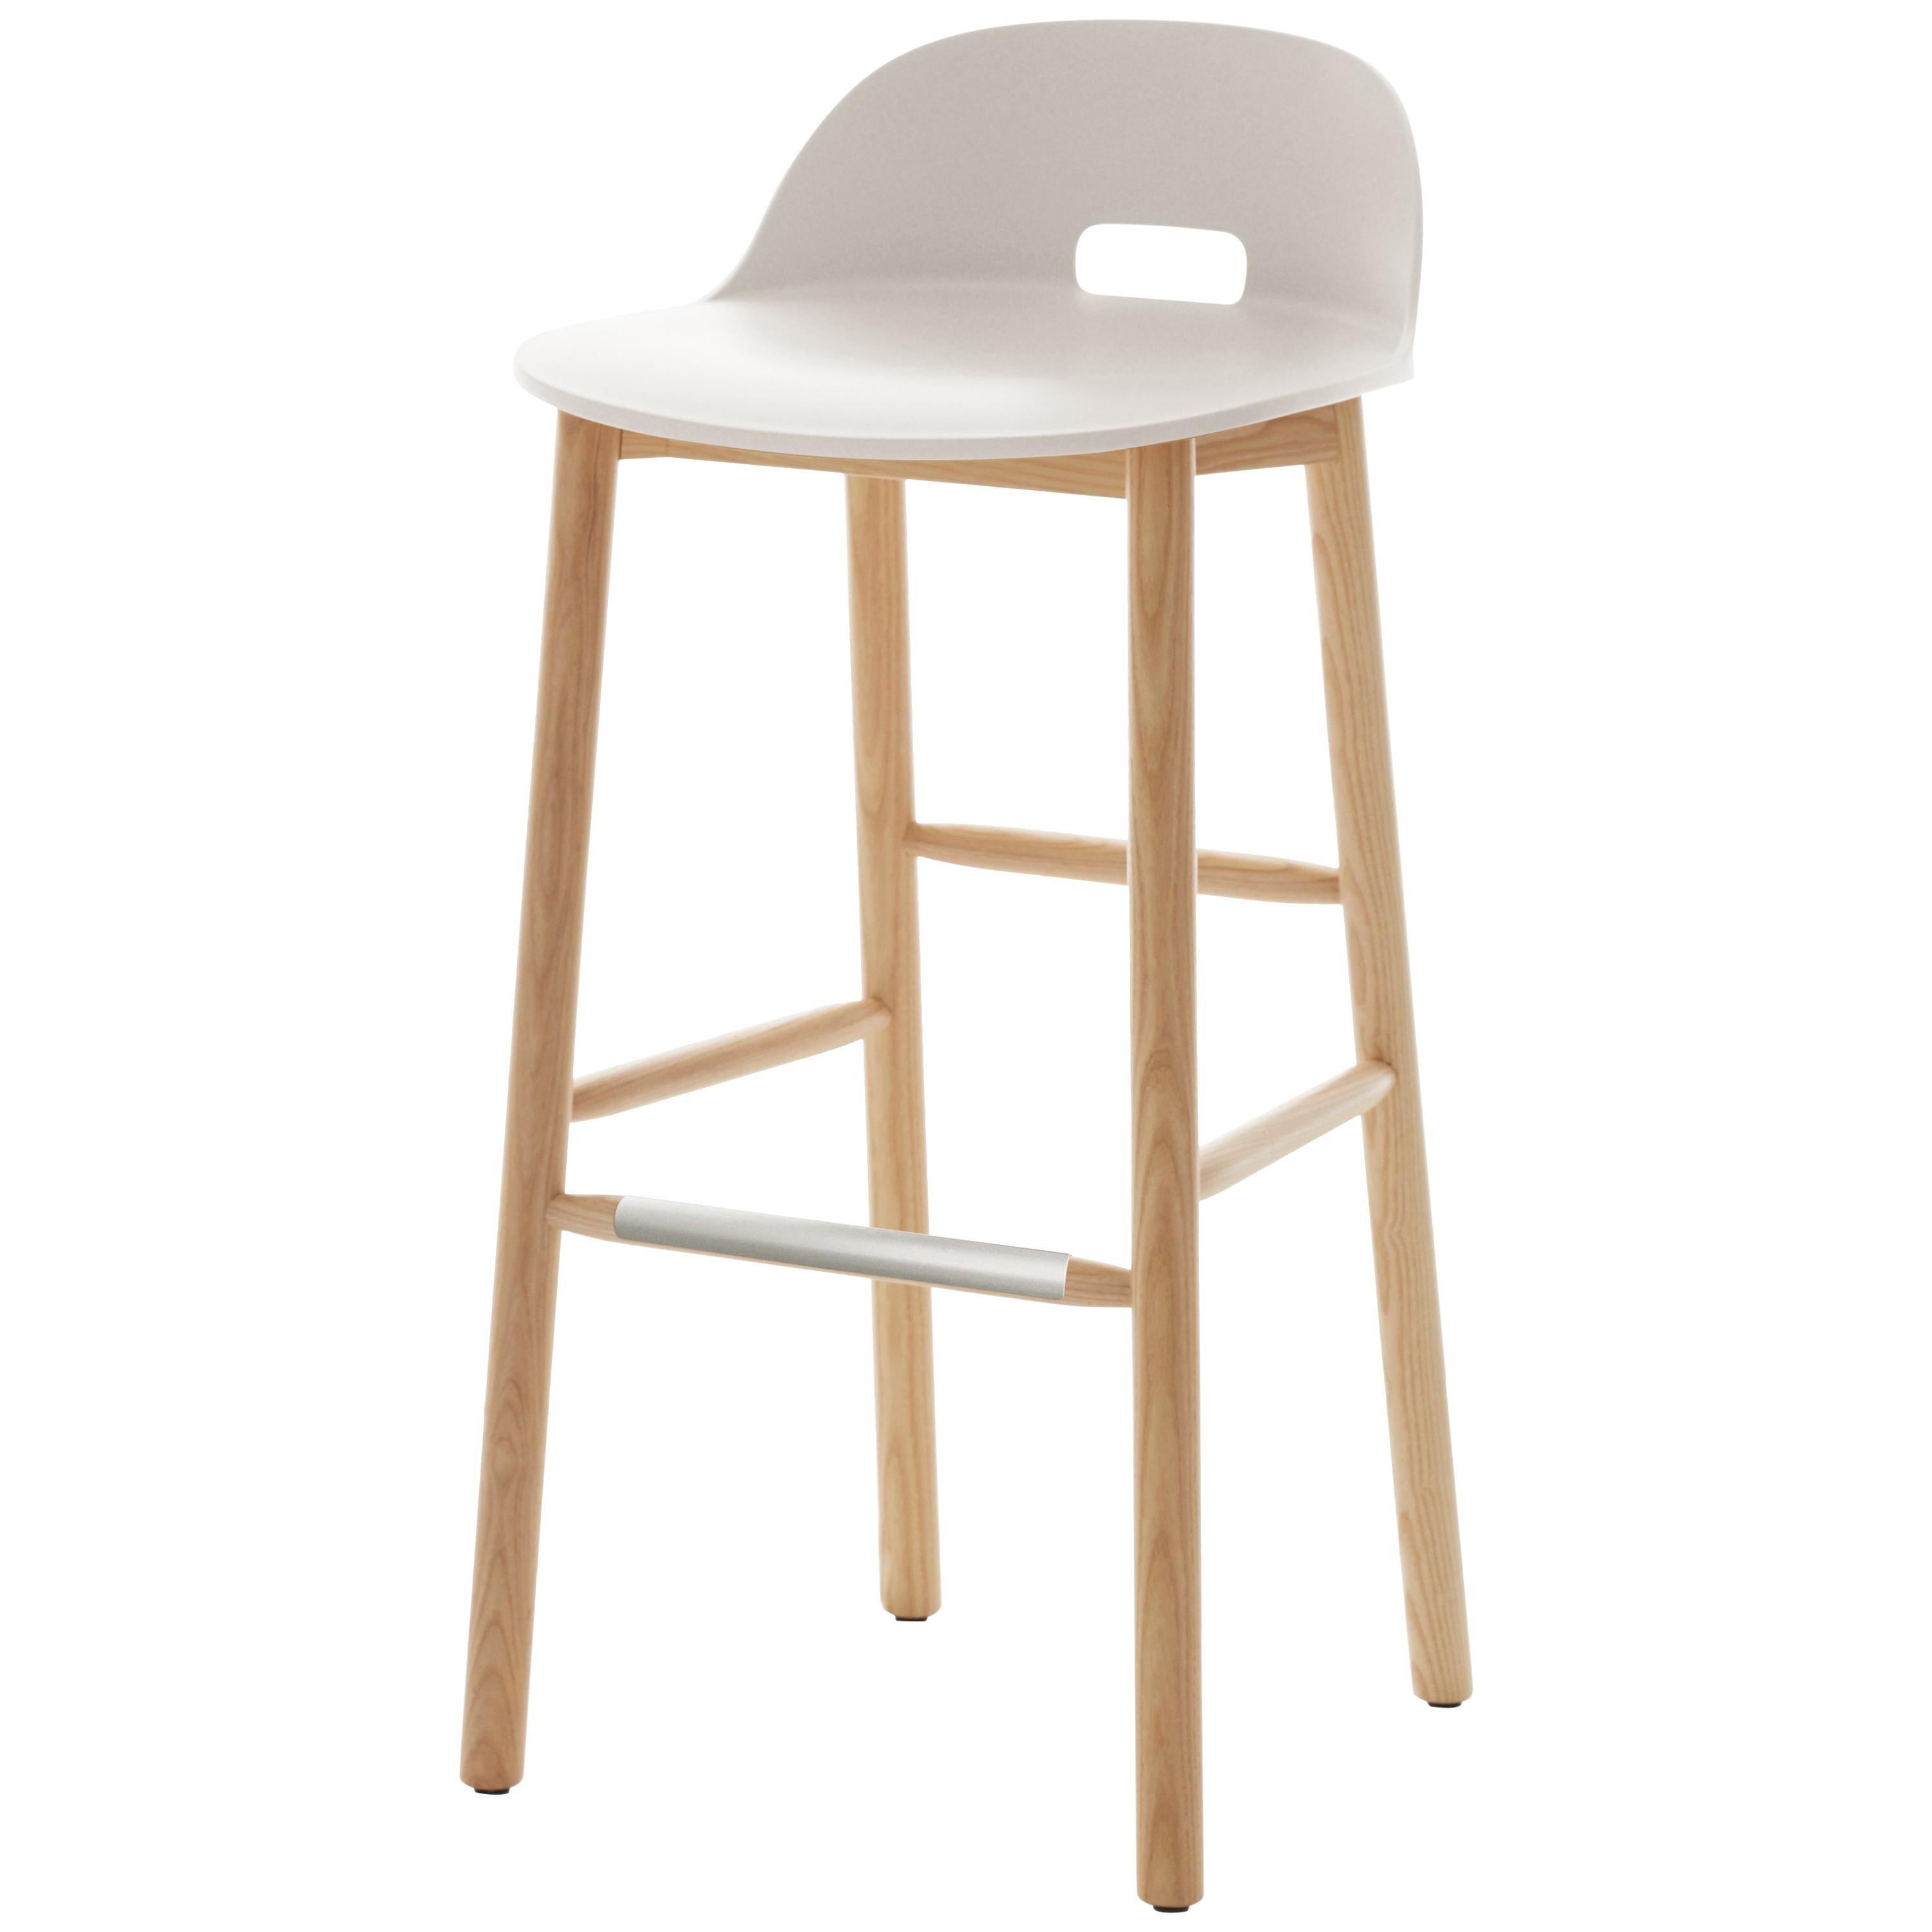 Emeco Alfi Barstool in White and Ash with Low Back by Jasper Morrison